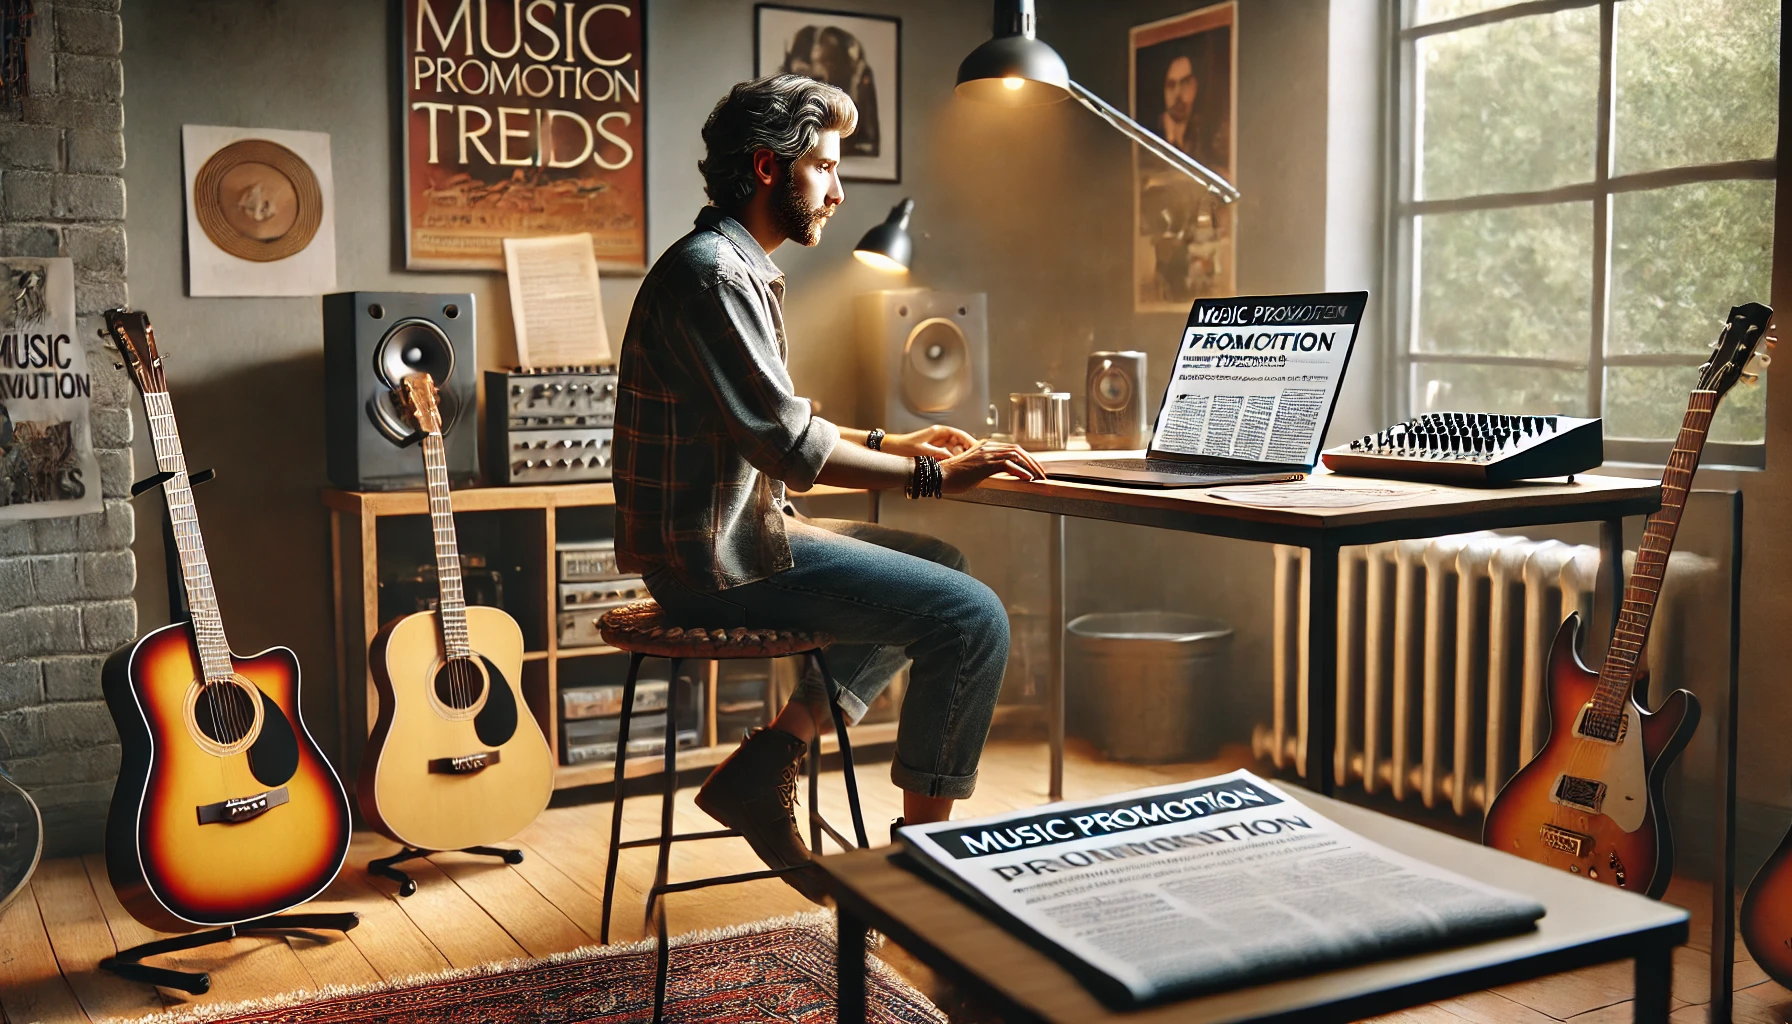 It shows a musician learning new promotion trends from a newsletter on a laptop, surrounded by a musical environment.